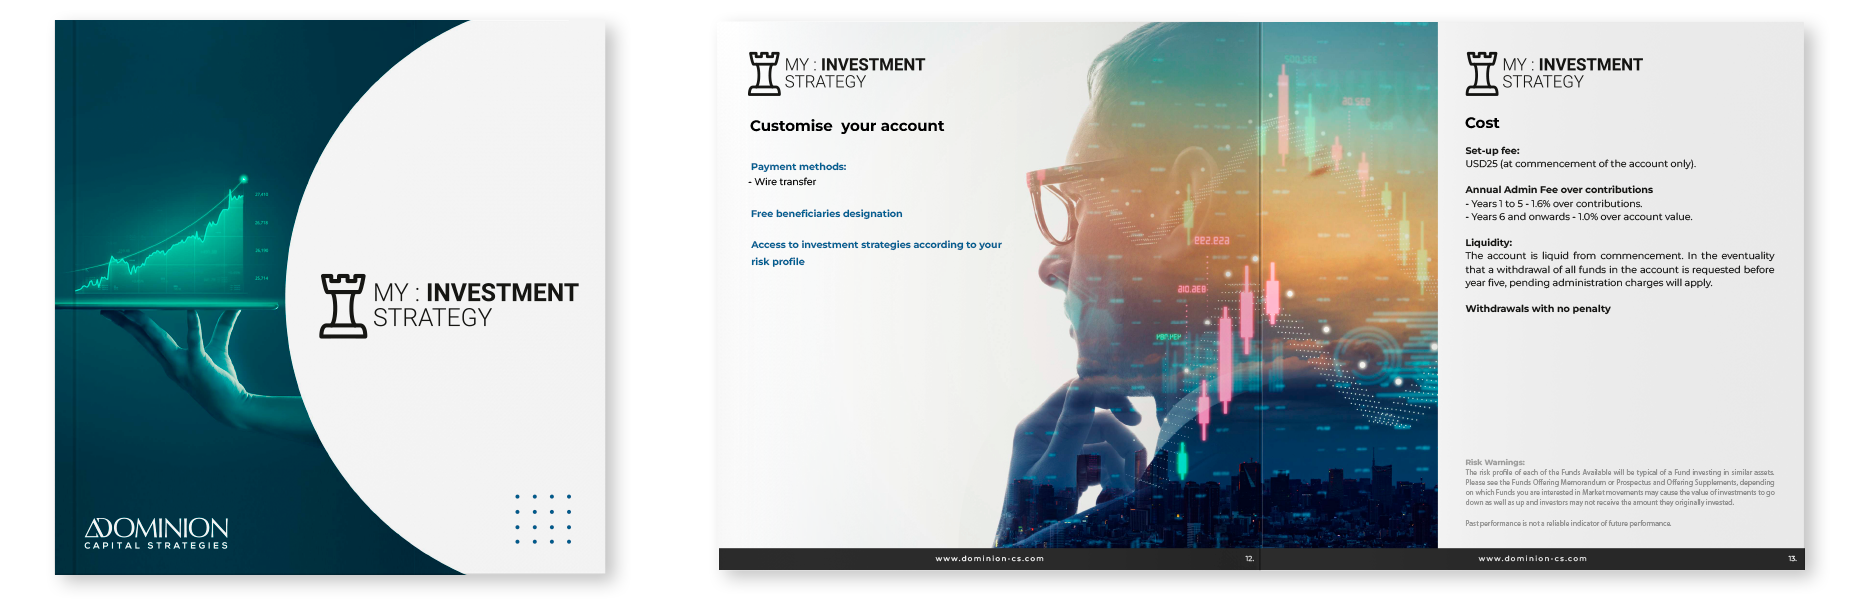 My : Investment Strategy ® Brochure